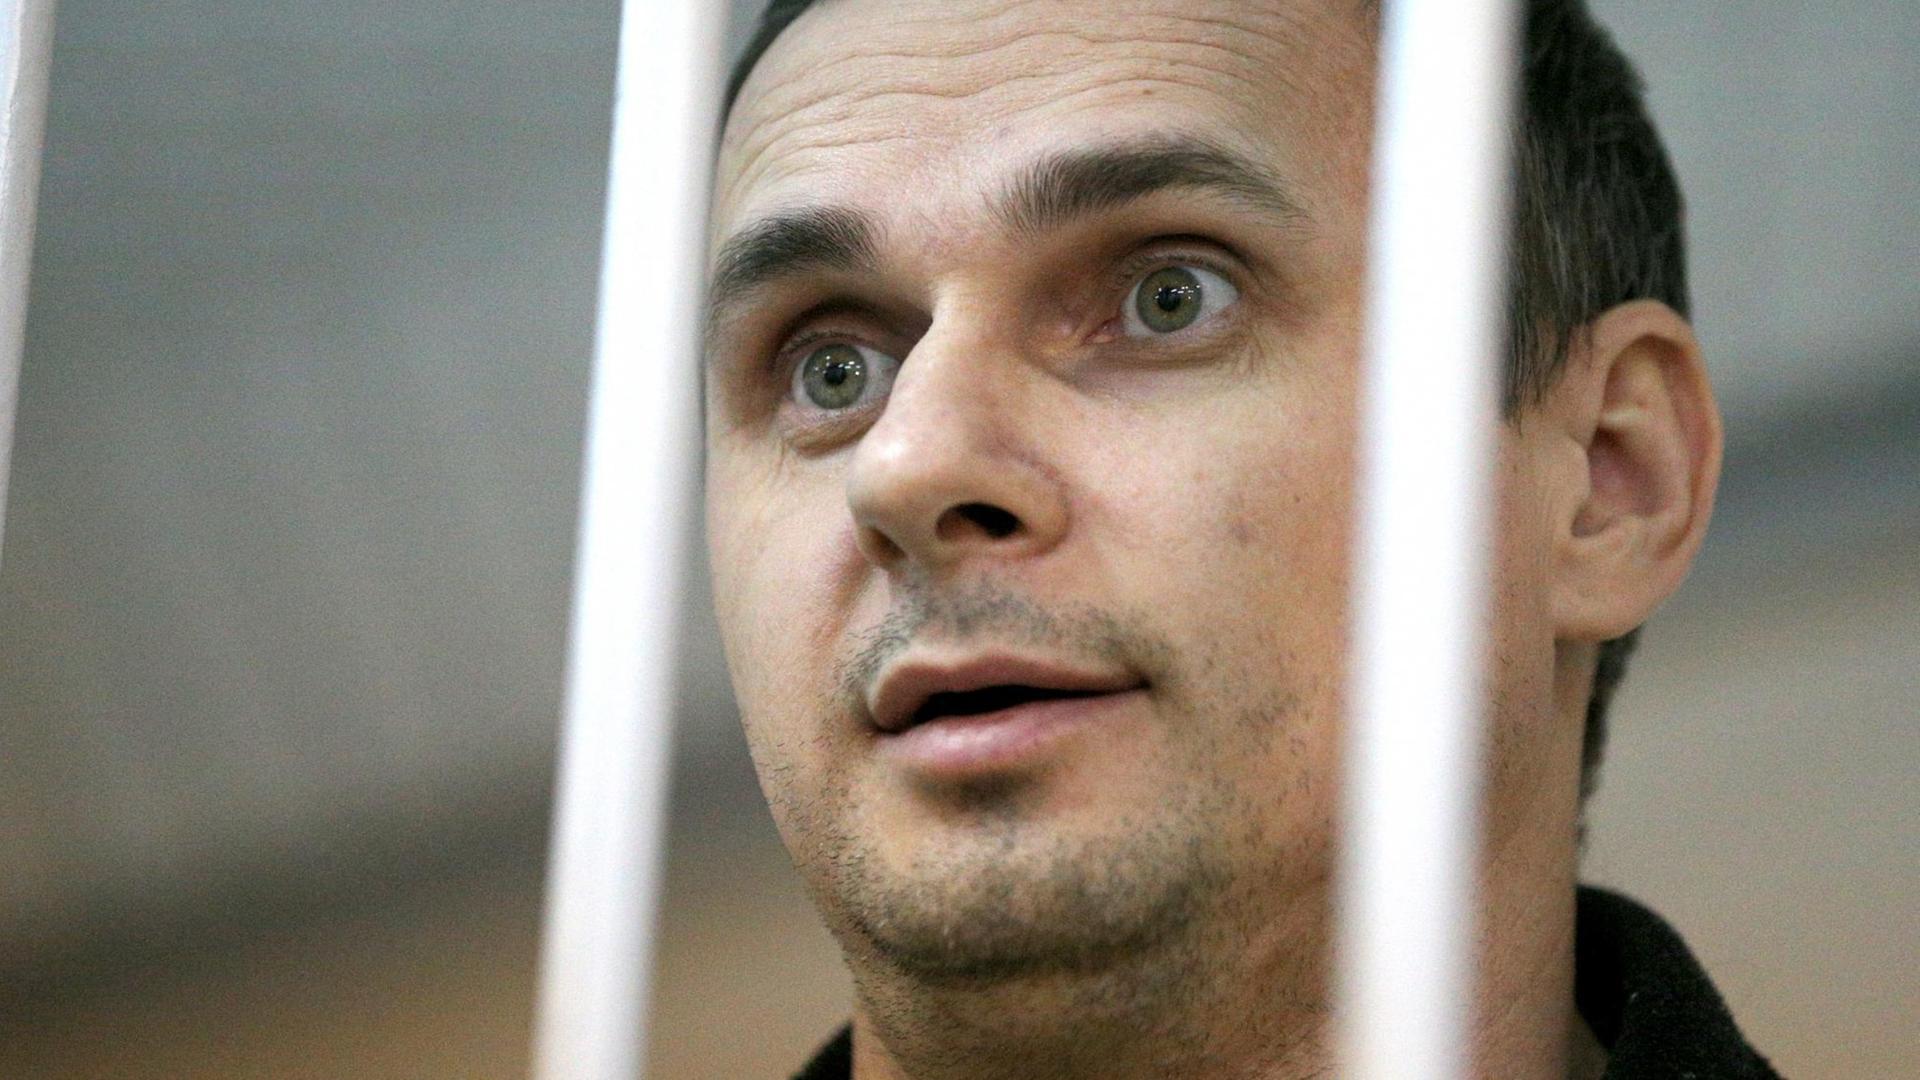 MOSCOW, RUSSIA. DECEMBER 26, 2014. Ukrainian film director Oleg Sentsov, detained in Crimea on charges of terrorism, seen in a cage during a hearing into the investigator's request to extend his arrest at Moscow's Lefortovo District Court. Mikhail Pochuyev/TASS